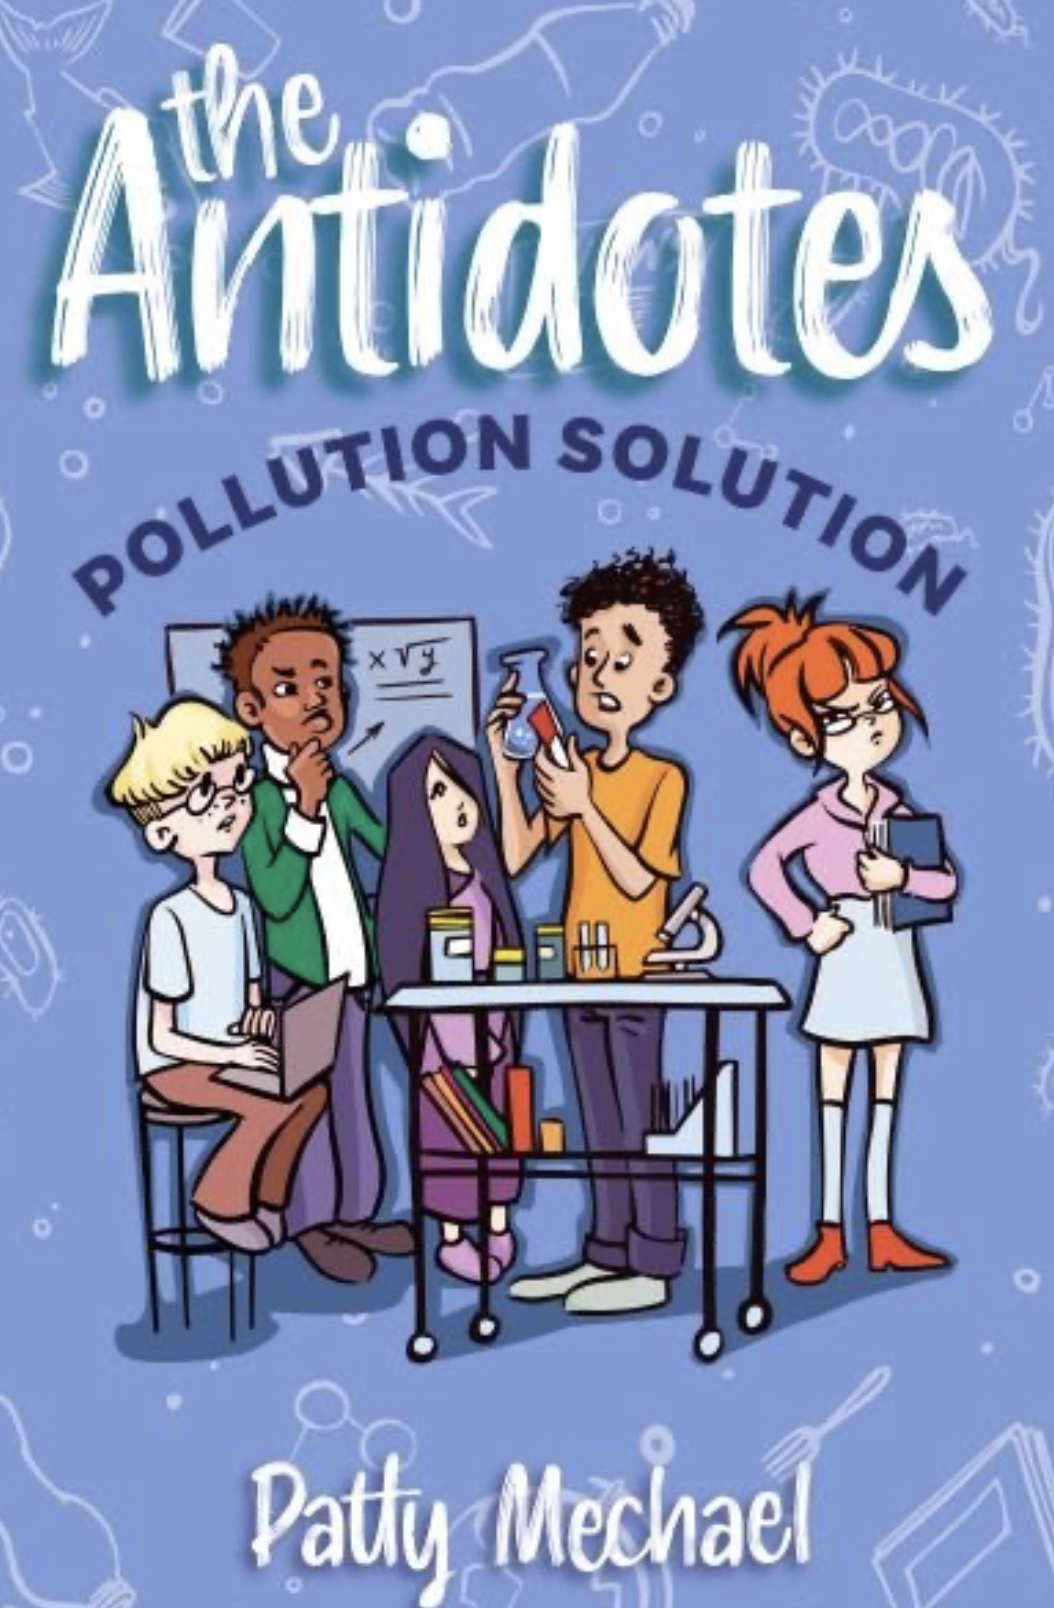 BookJacket_PollutionSolution